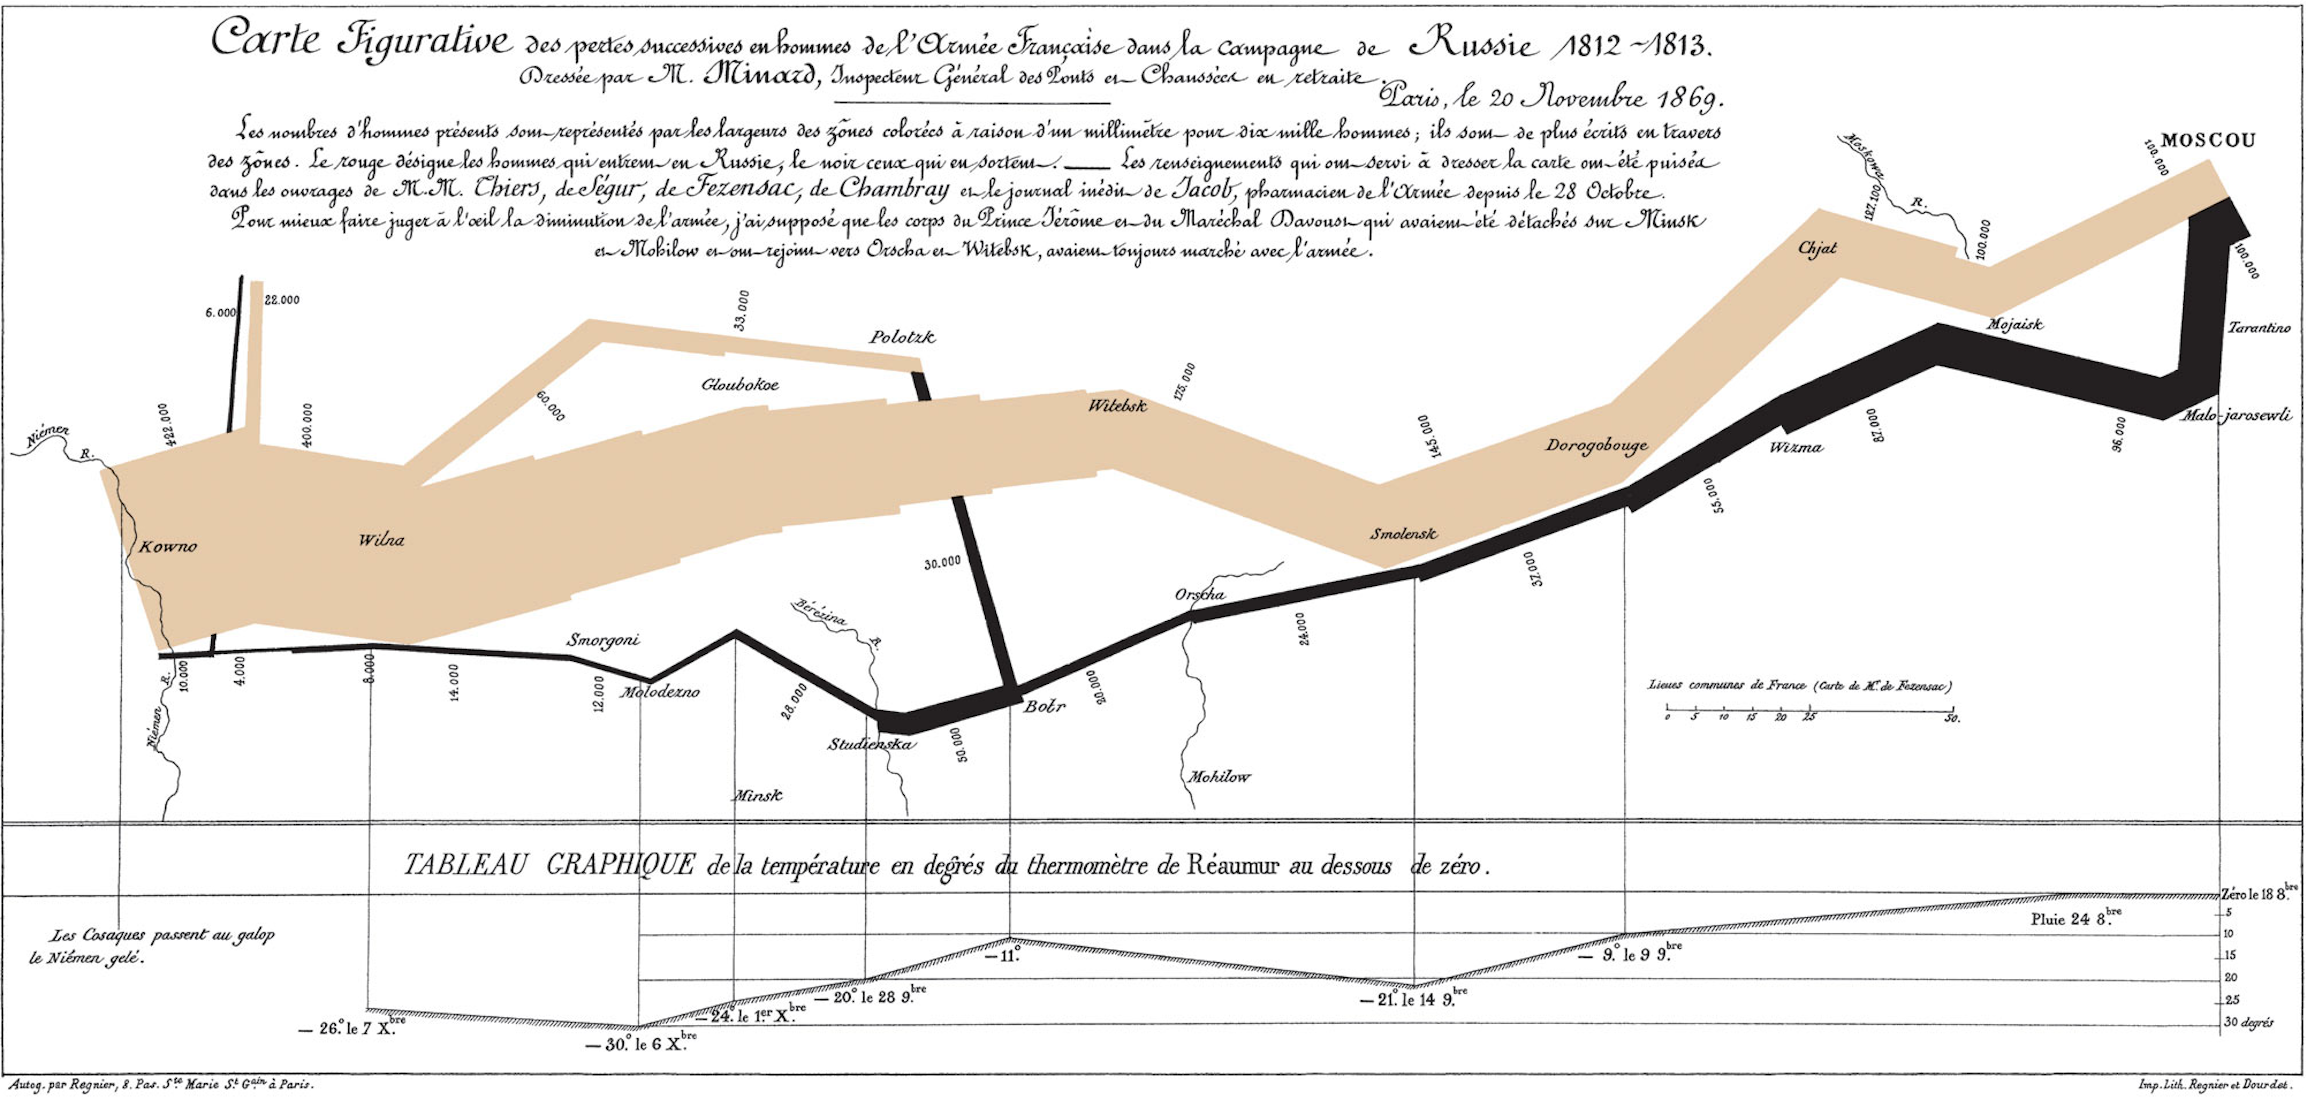 Minard's Visualization of Napolean's March